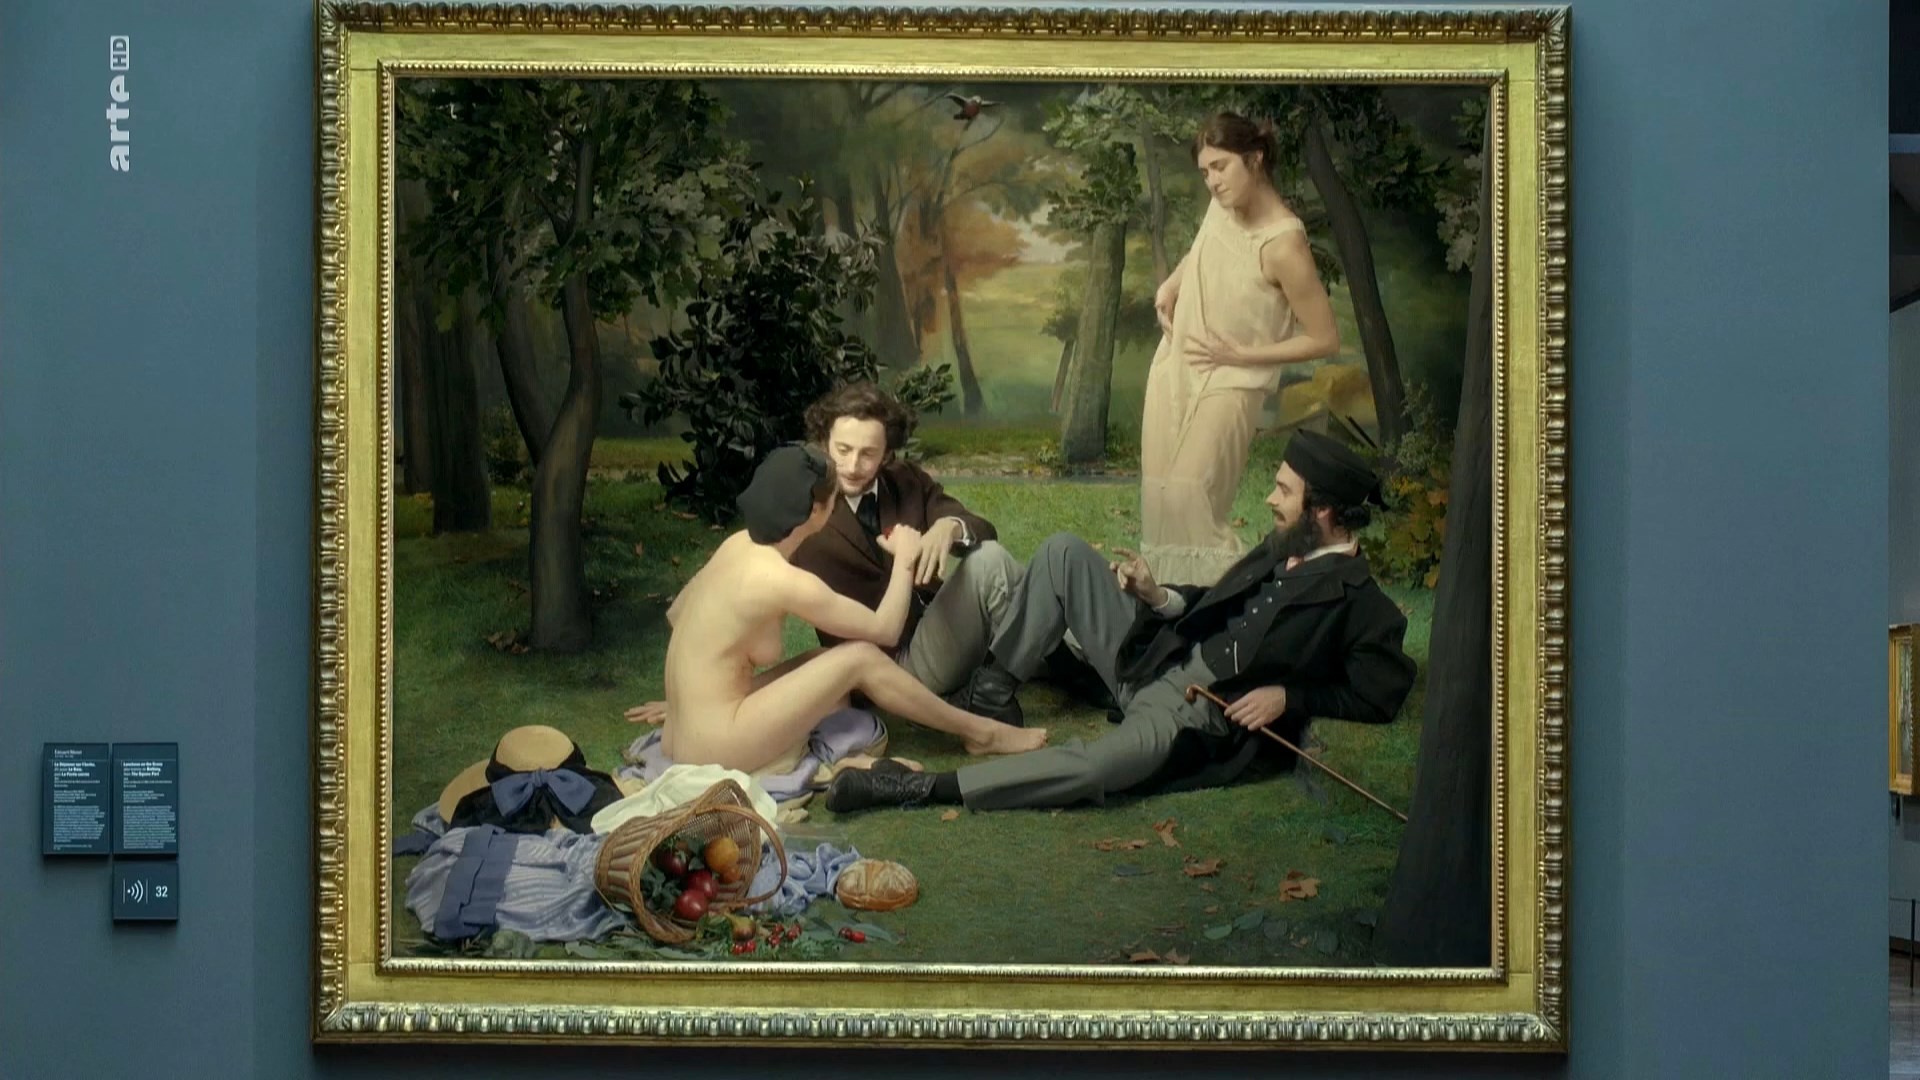 Watch Online - Camille Demoures - A Musee vous, a musee moi Le Dejeuner sur  l'herbe - Libertinage (2019) HD 1080p